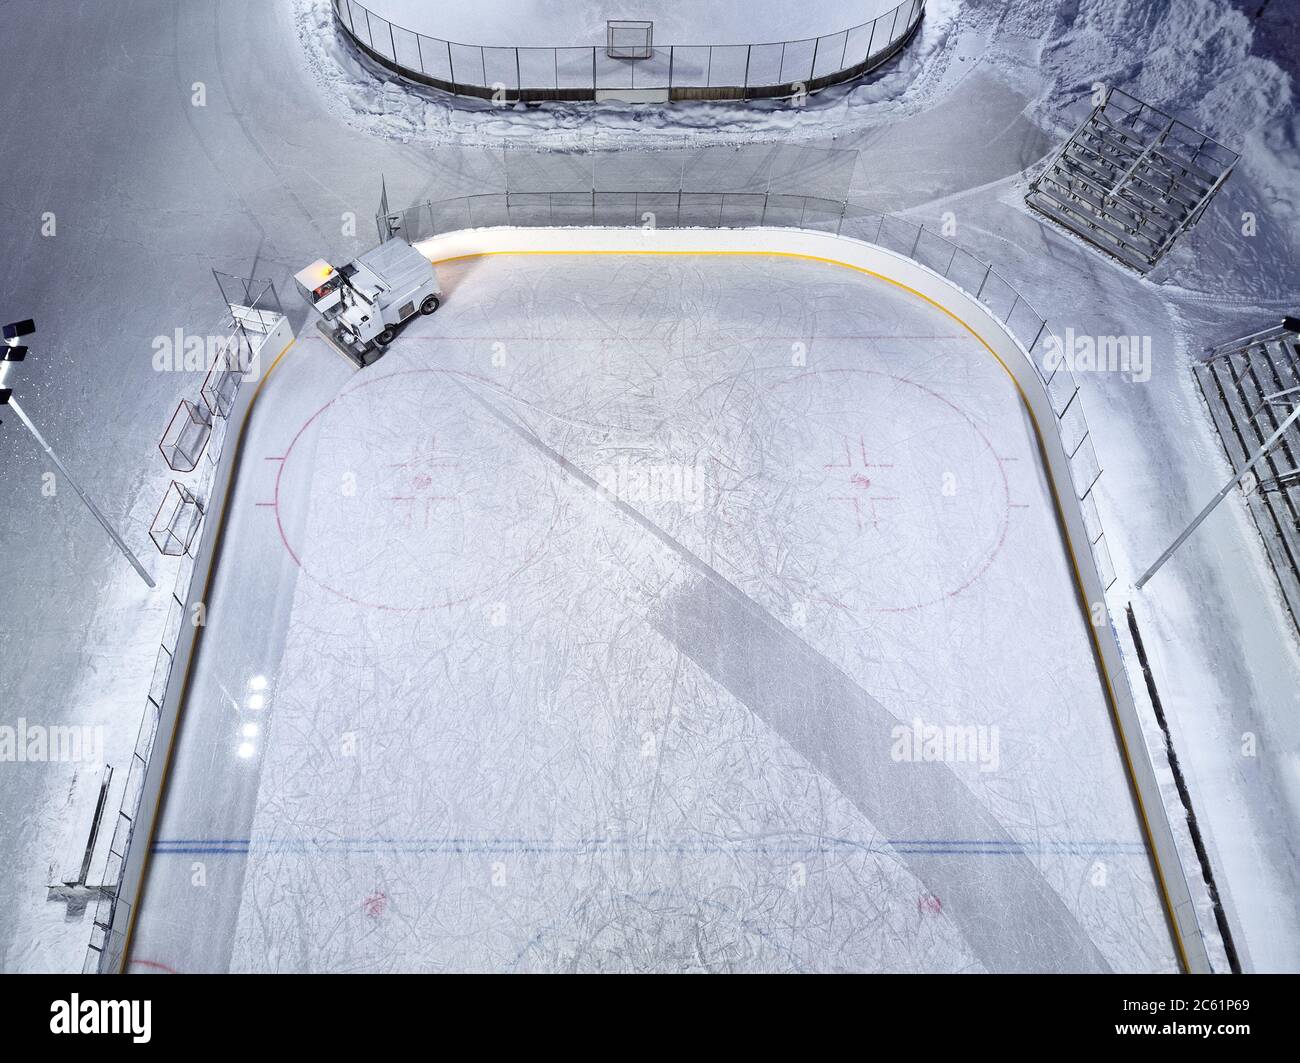 Aerial view of a ice rink, Ice resurfacer to clean and smooth the surface of a sheet of ice rink Stock Photo